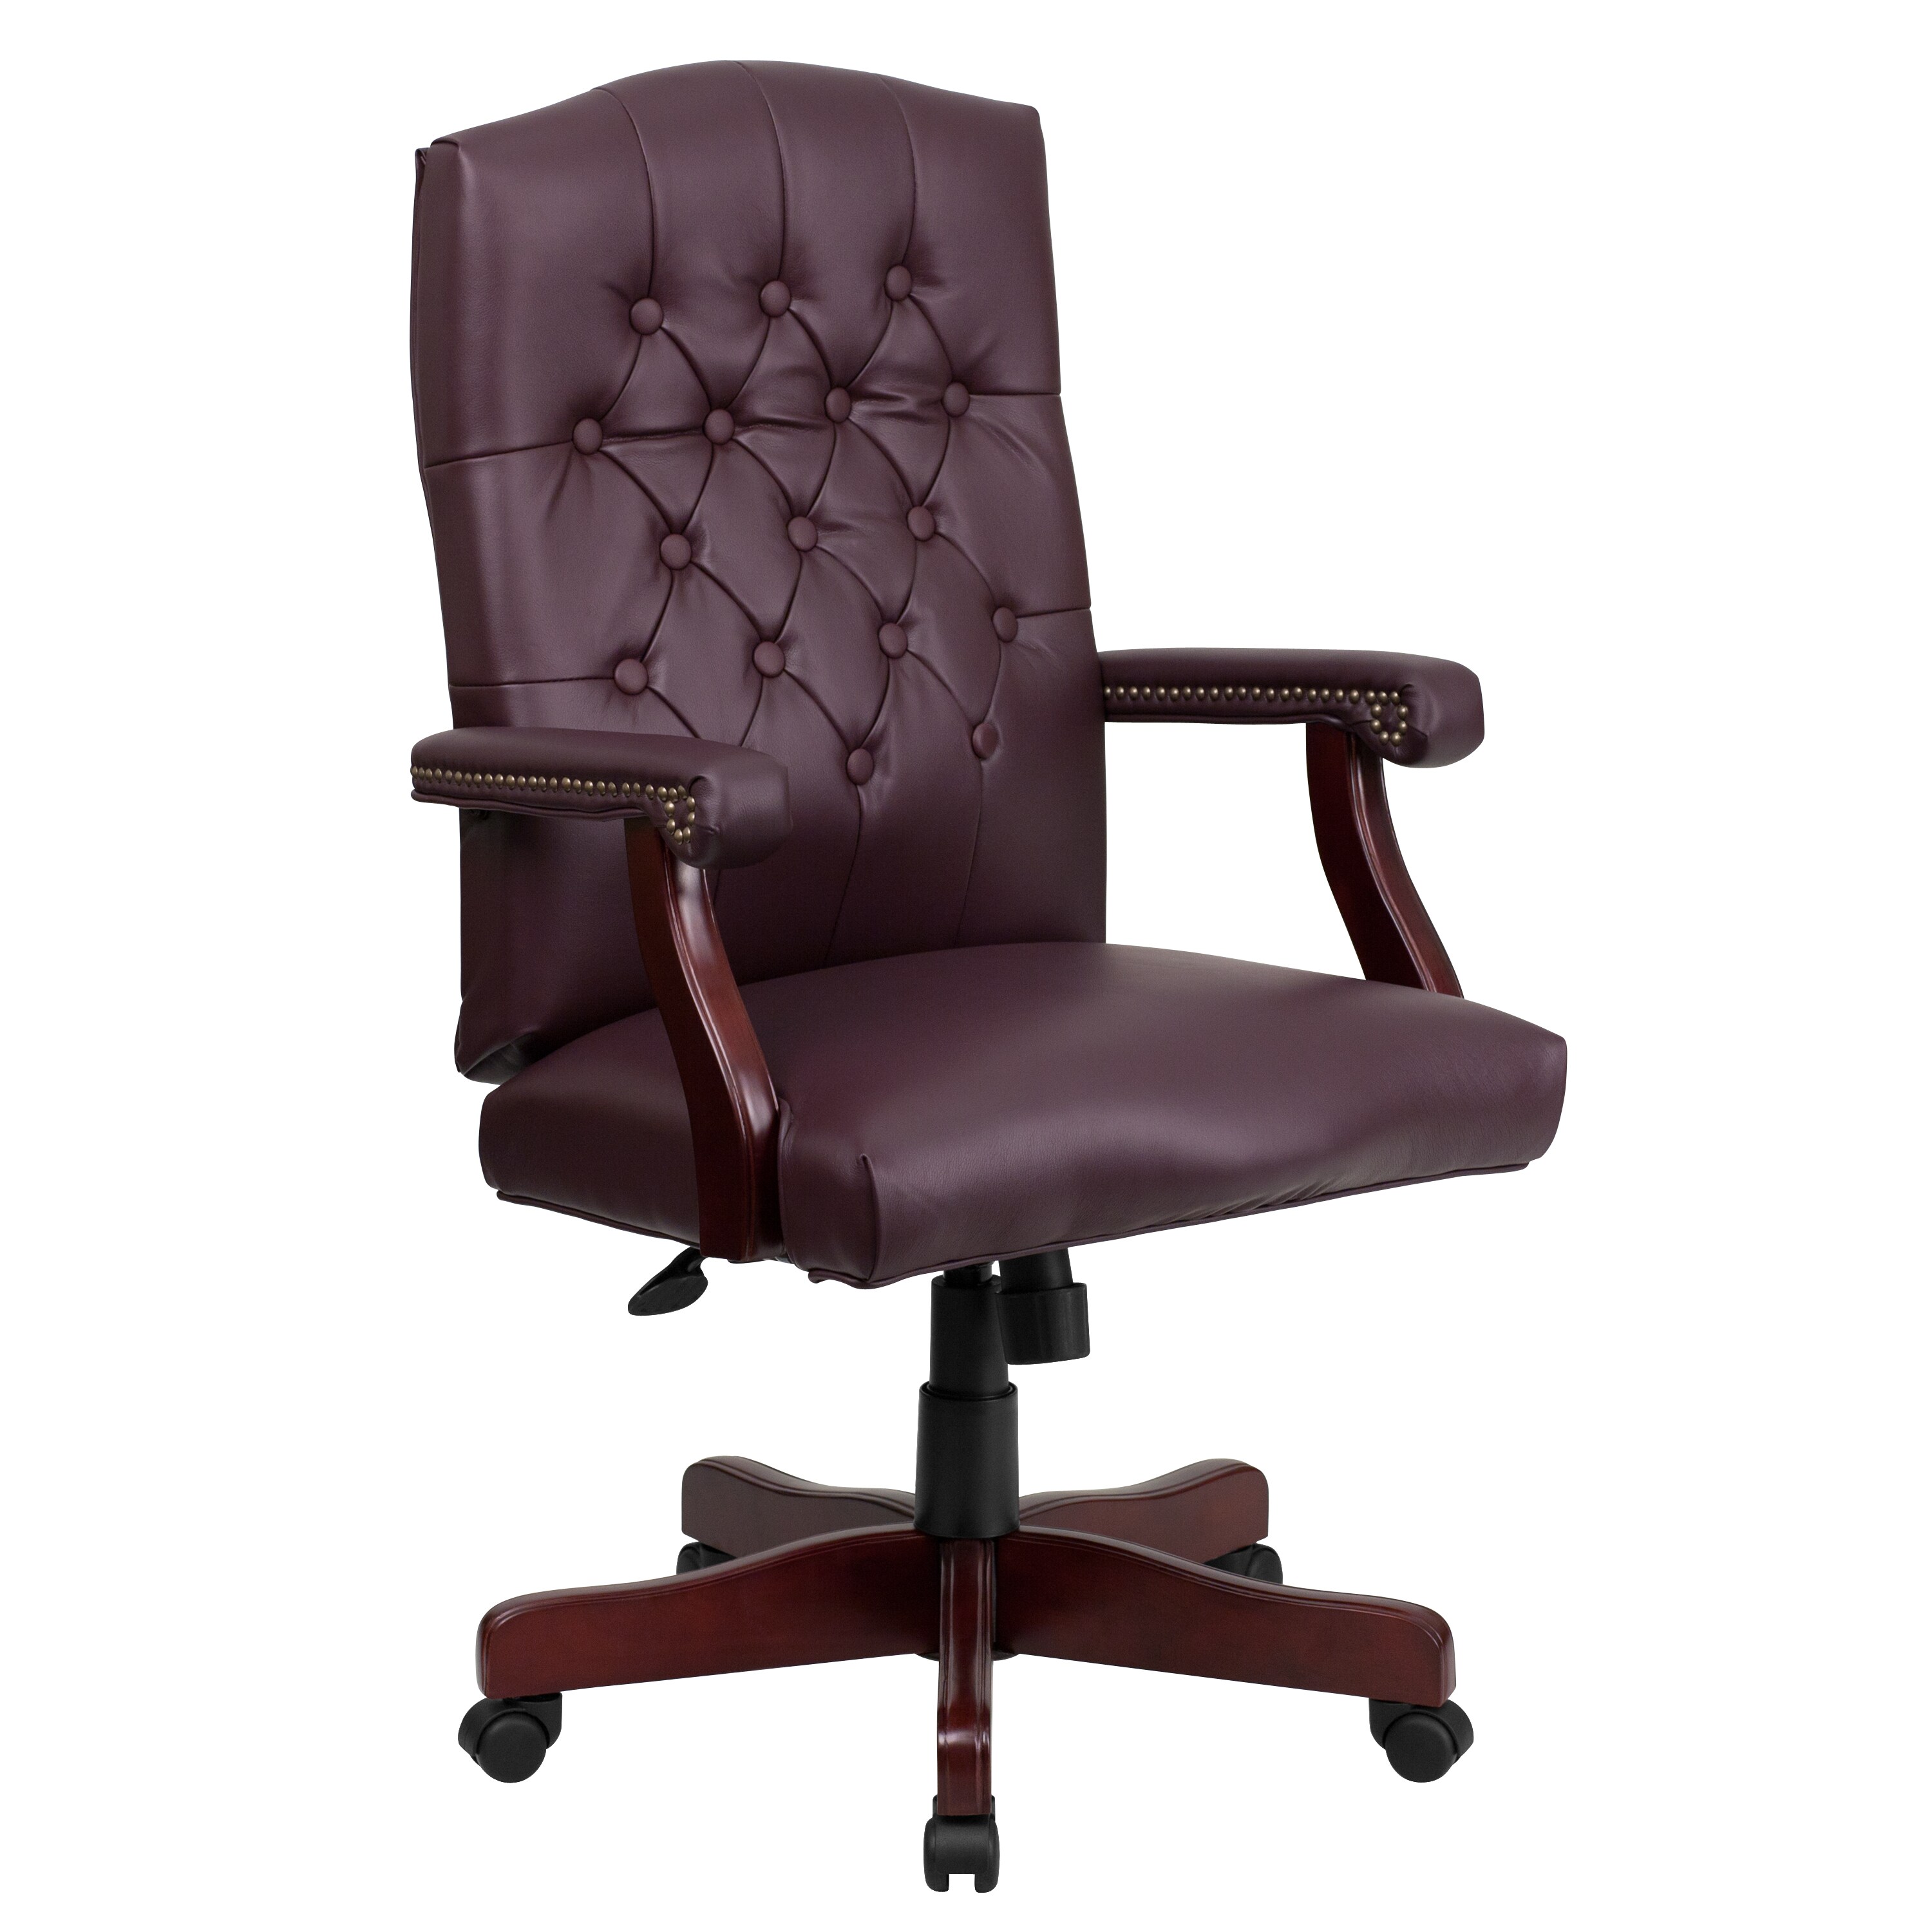 Traditional Style Burgundy Leather Conference Office Chair w/Nail Trim & Casters 